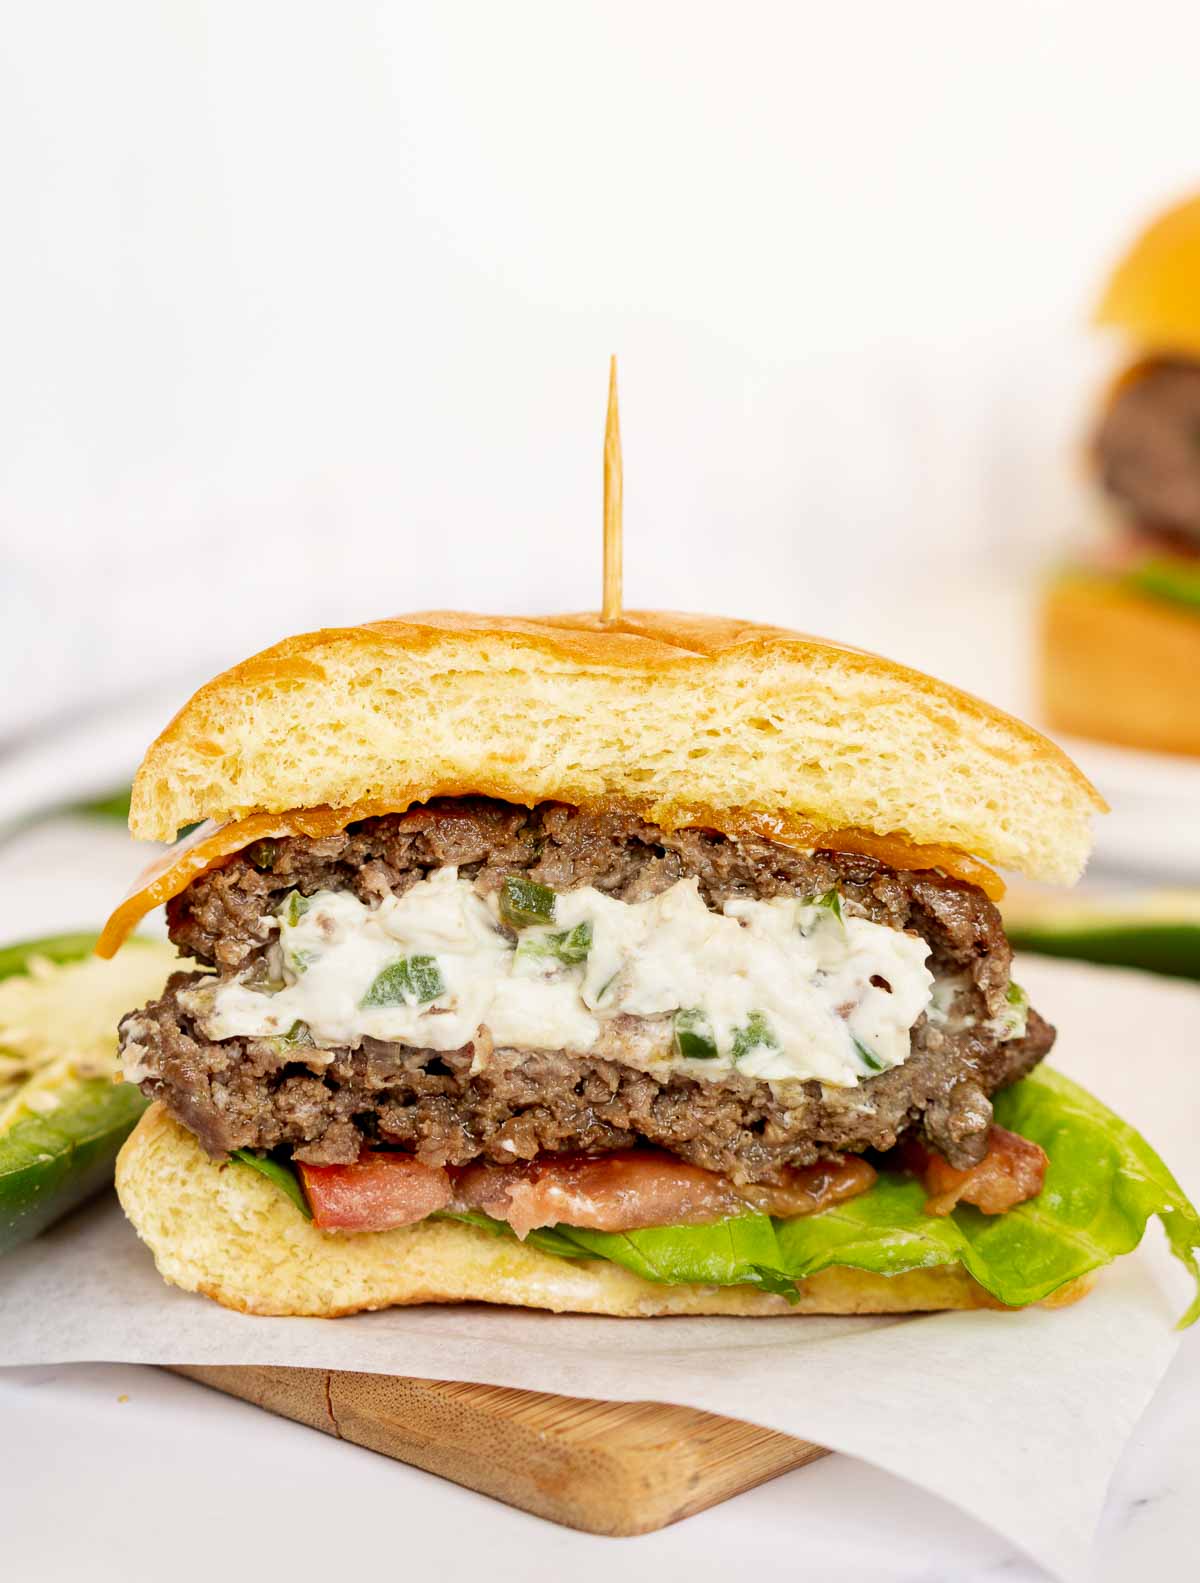 A Jalapeño Popper Burger with Cream cheese inside.